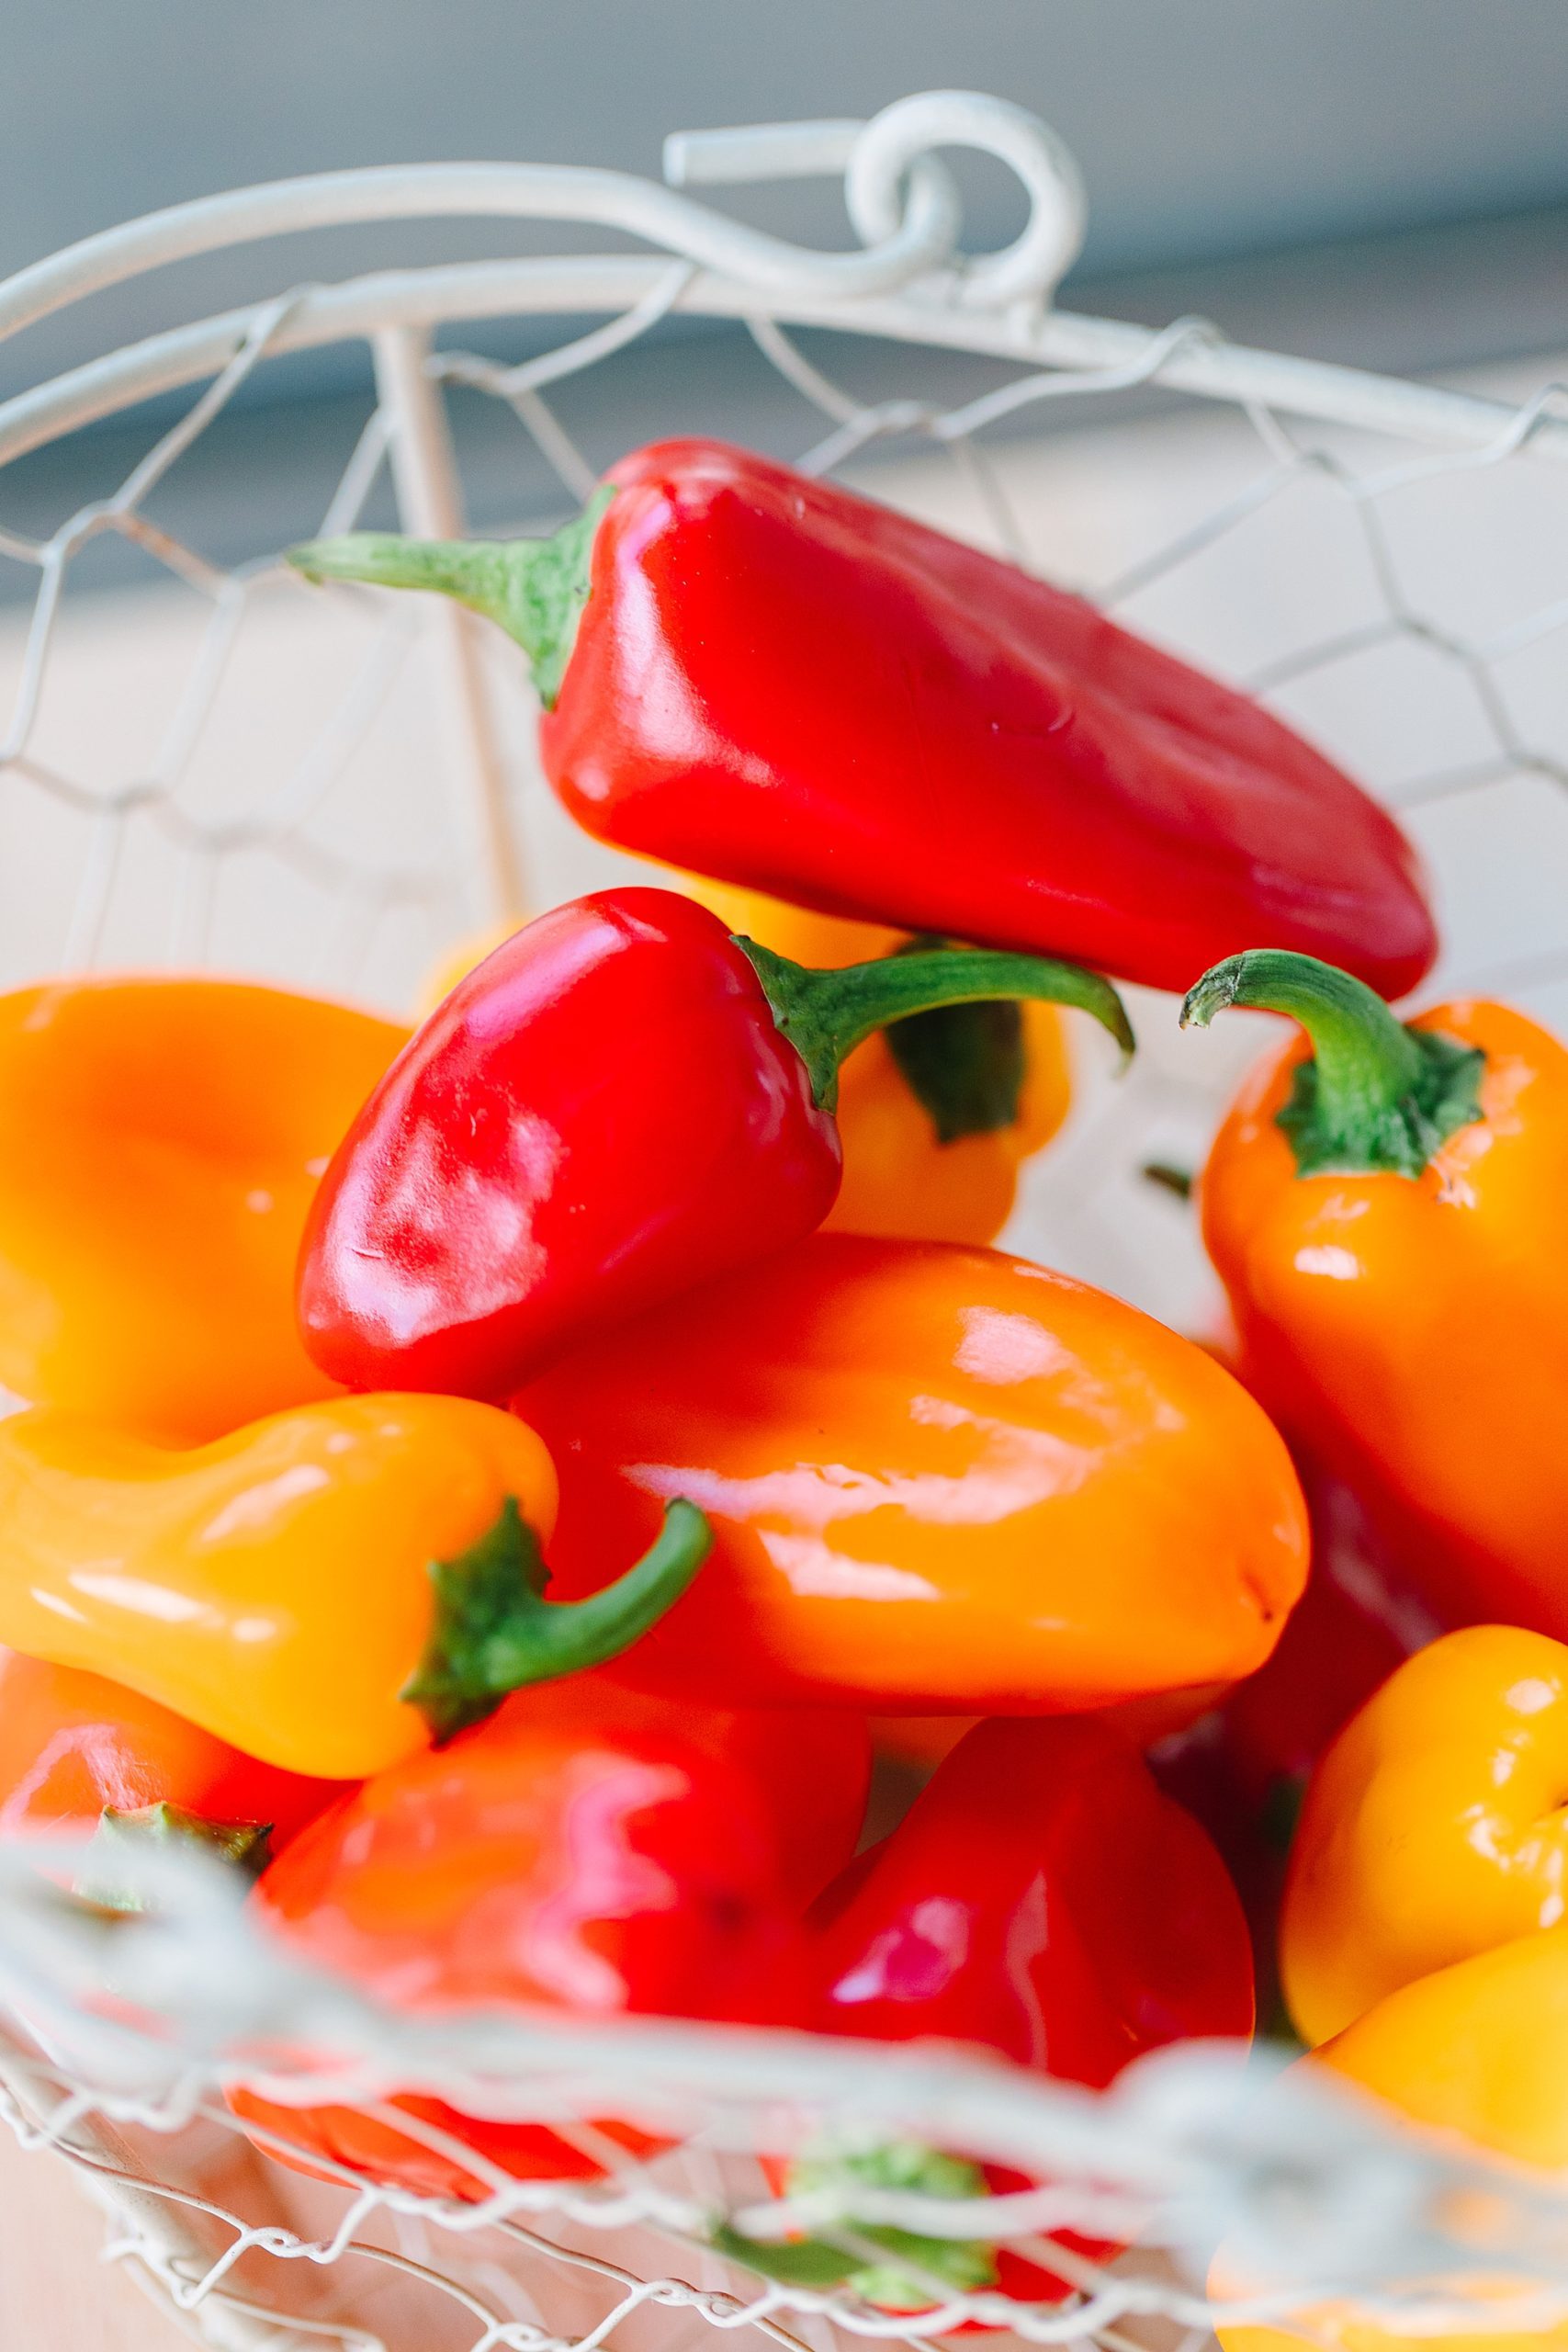 red and orange peppers lay in white basket